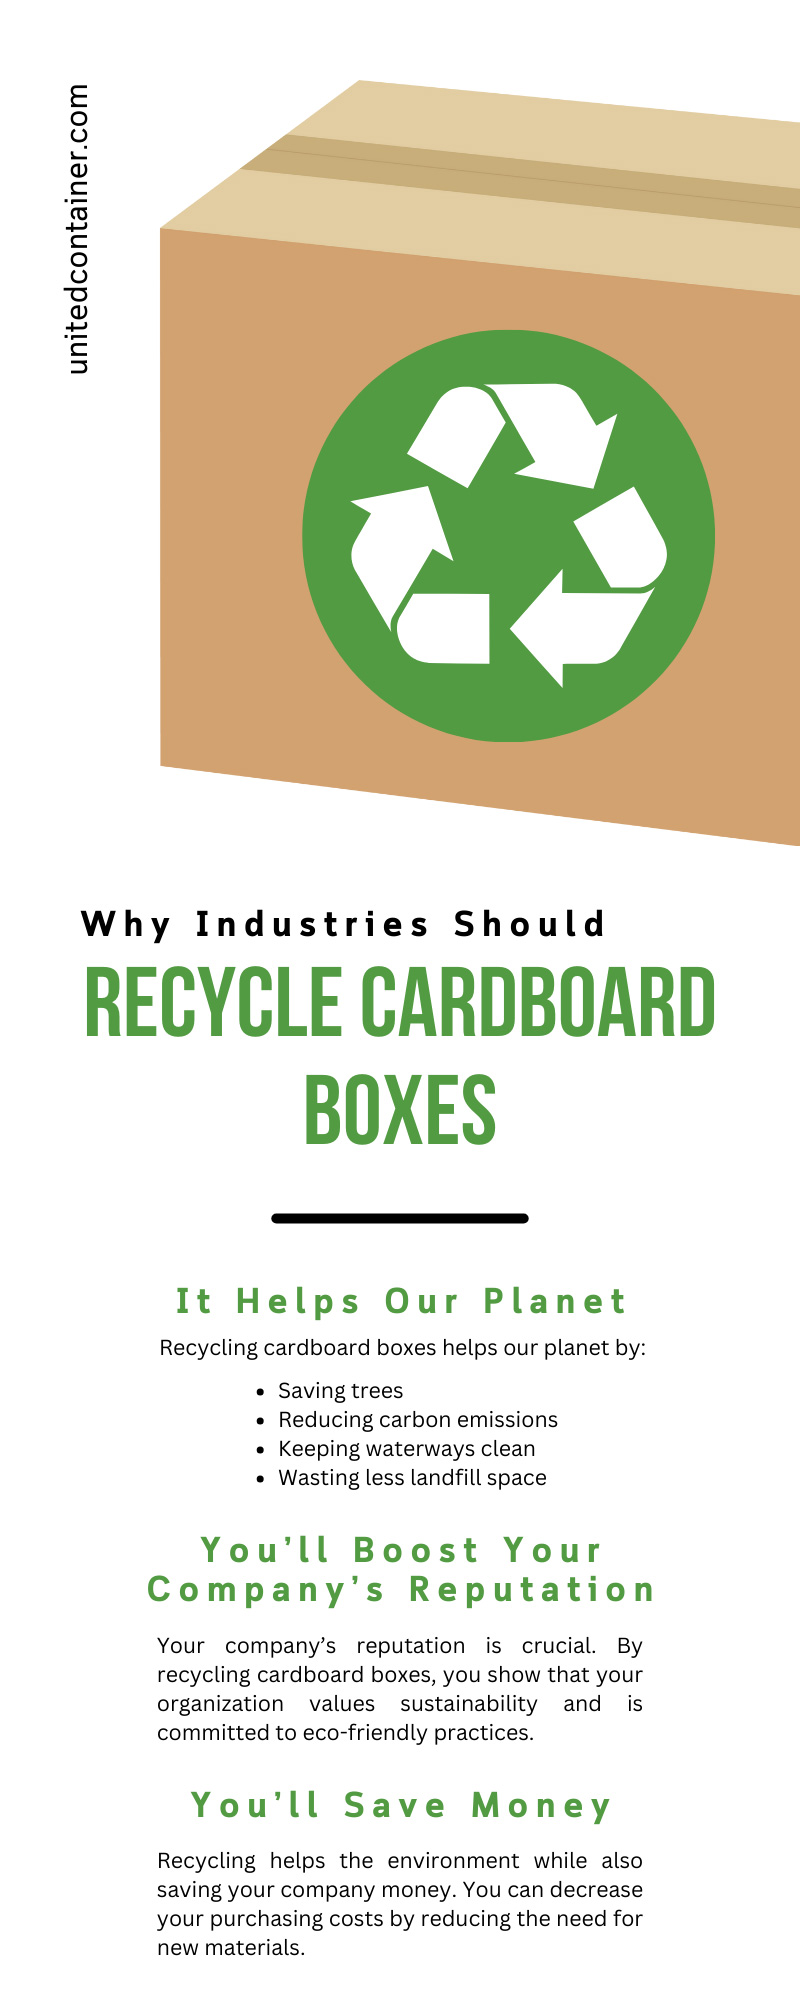 Why Industries Should Recycle Cardboard Boxes
